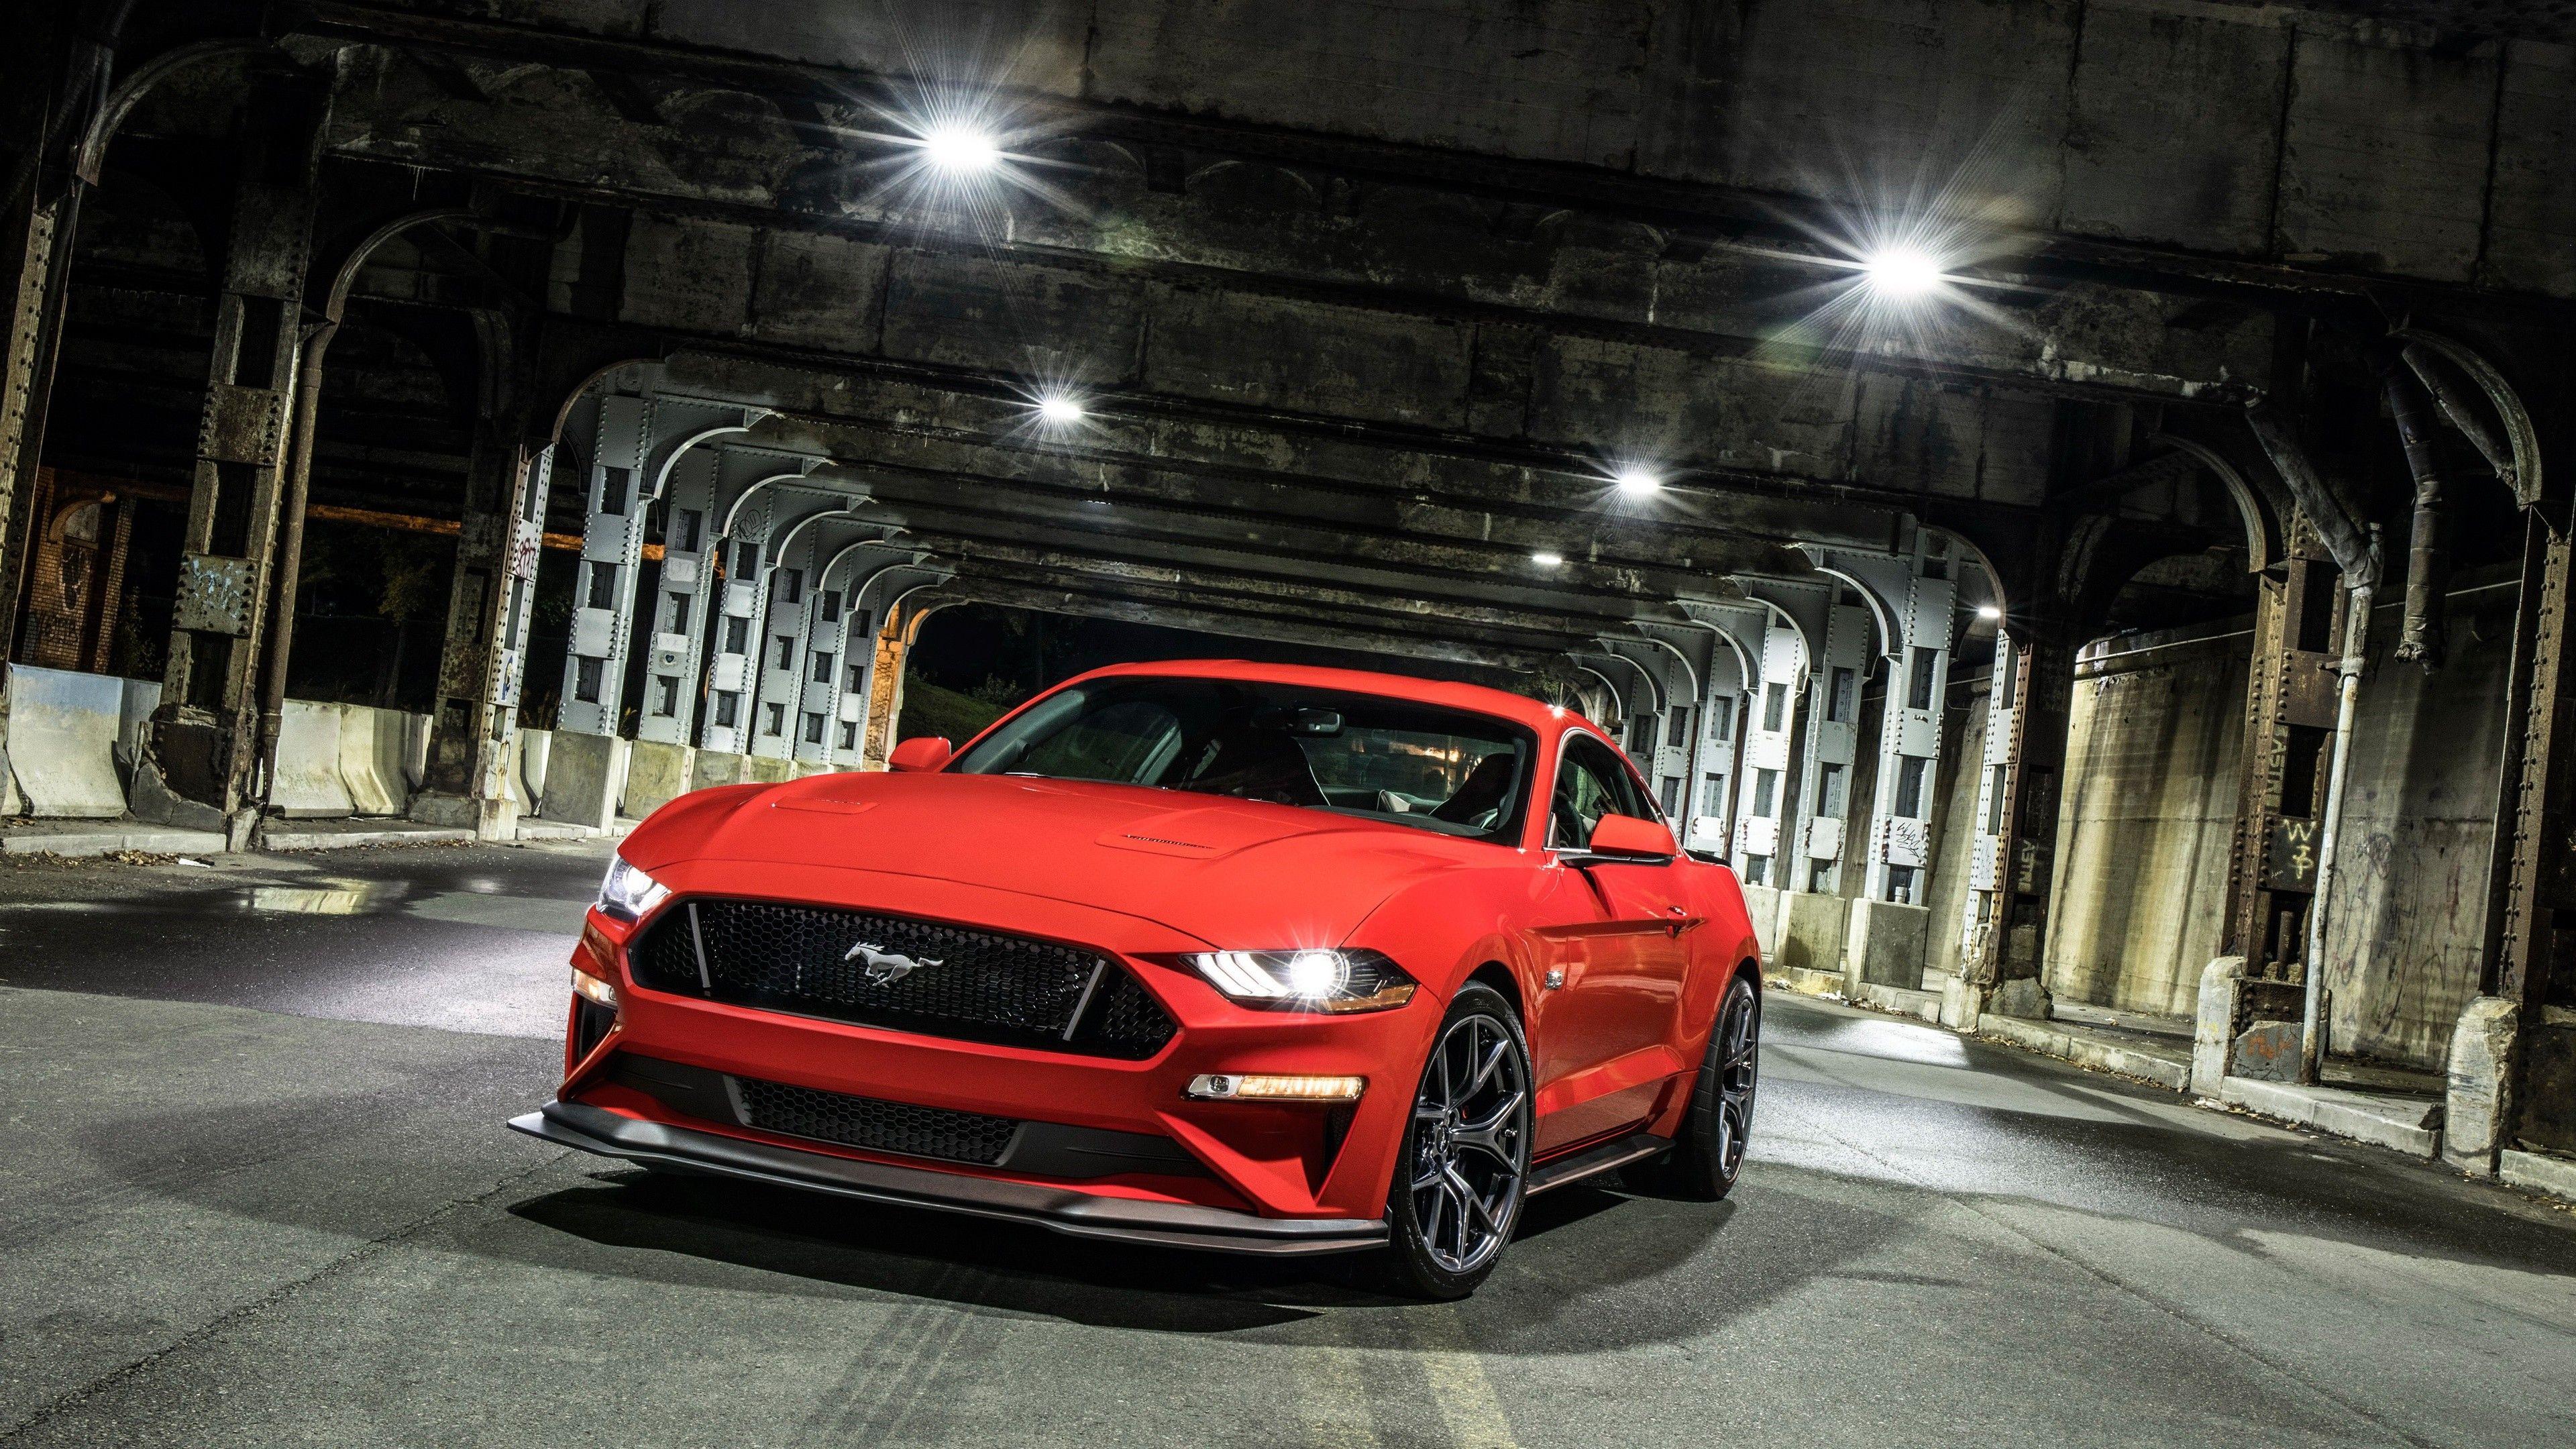 16++ 2015 Ford Mustang Gt Front Hd Wallpaper 12 free download